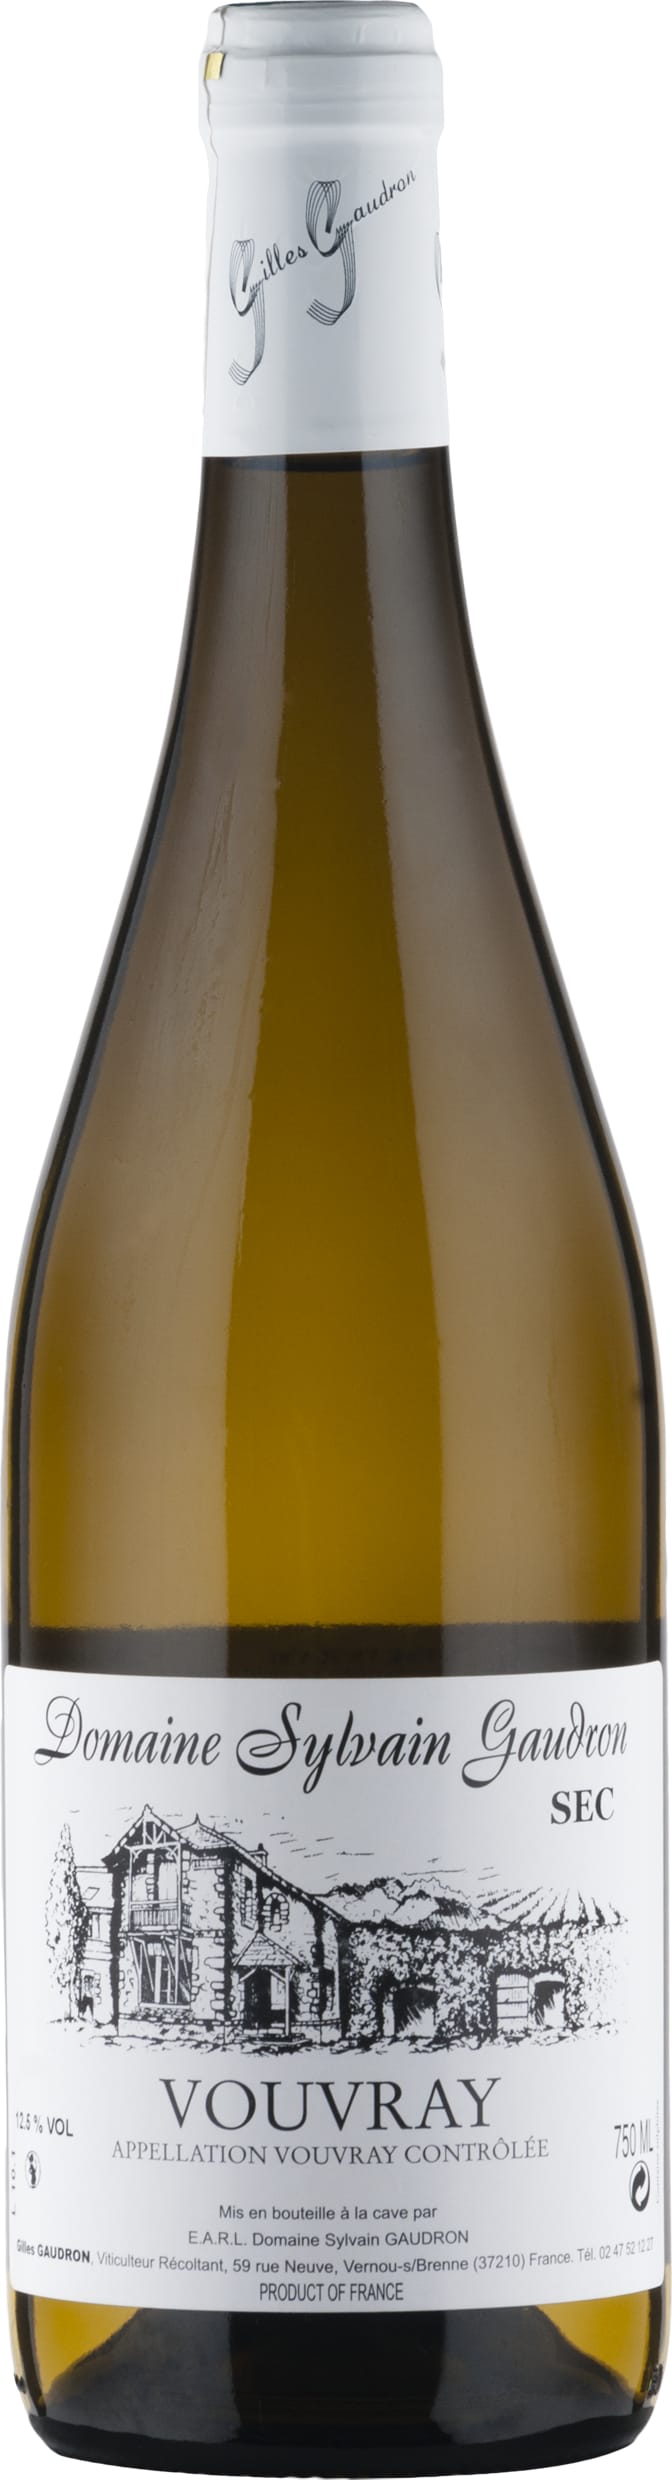 Sylvain Gaudron Vouvray Sec 2021 75cl - Buy Sylvain Gaudron Wines from GREAT WINES DIRECT wine shop